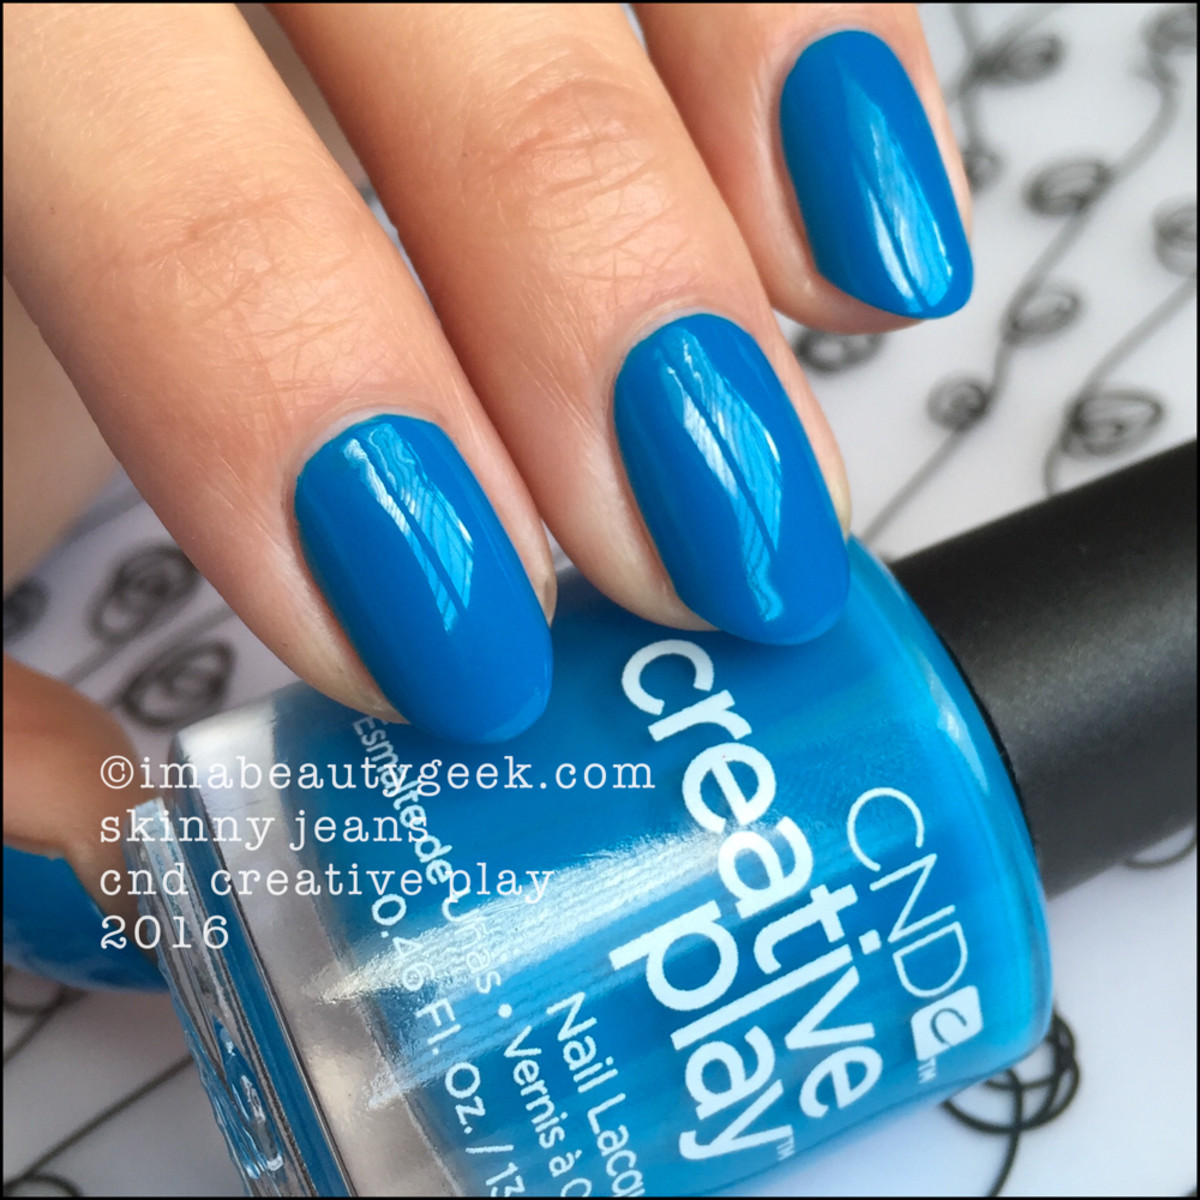 CND Creative Play Skinny Jeans_CND Creative Play Nail Polish Swatches